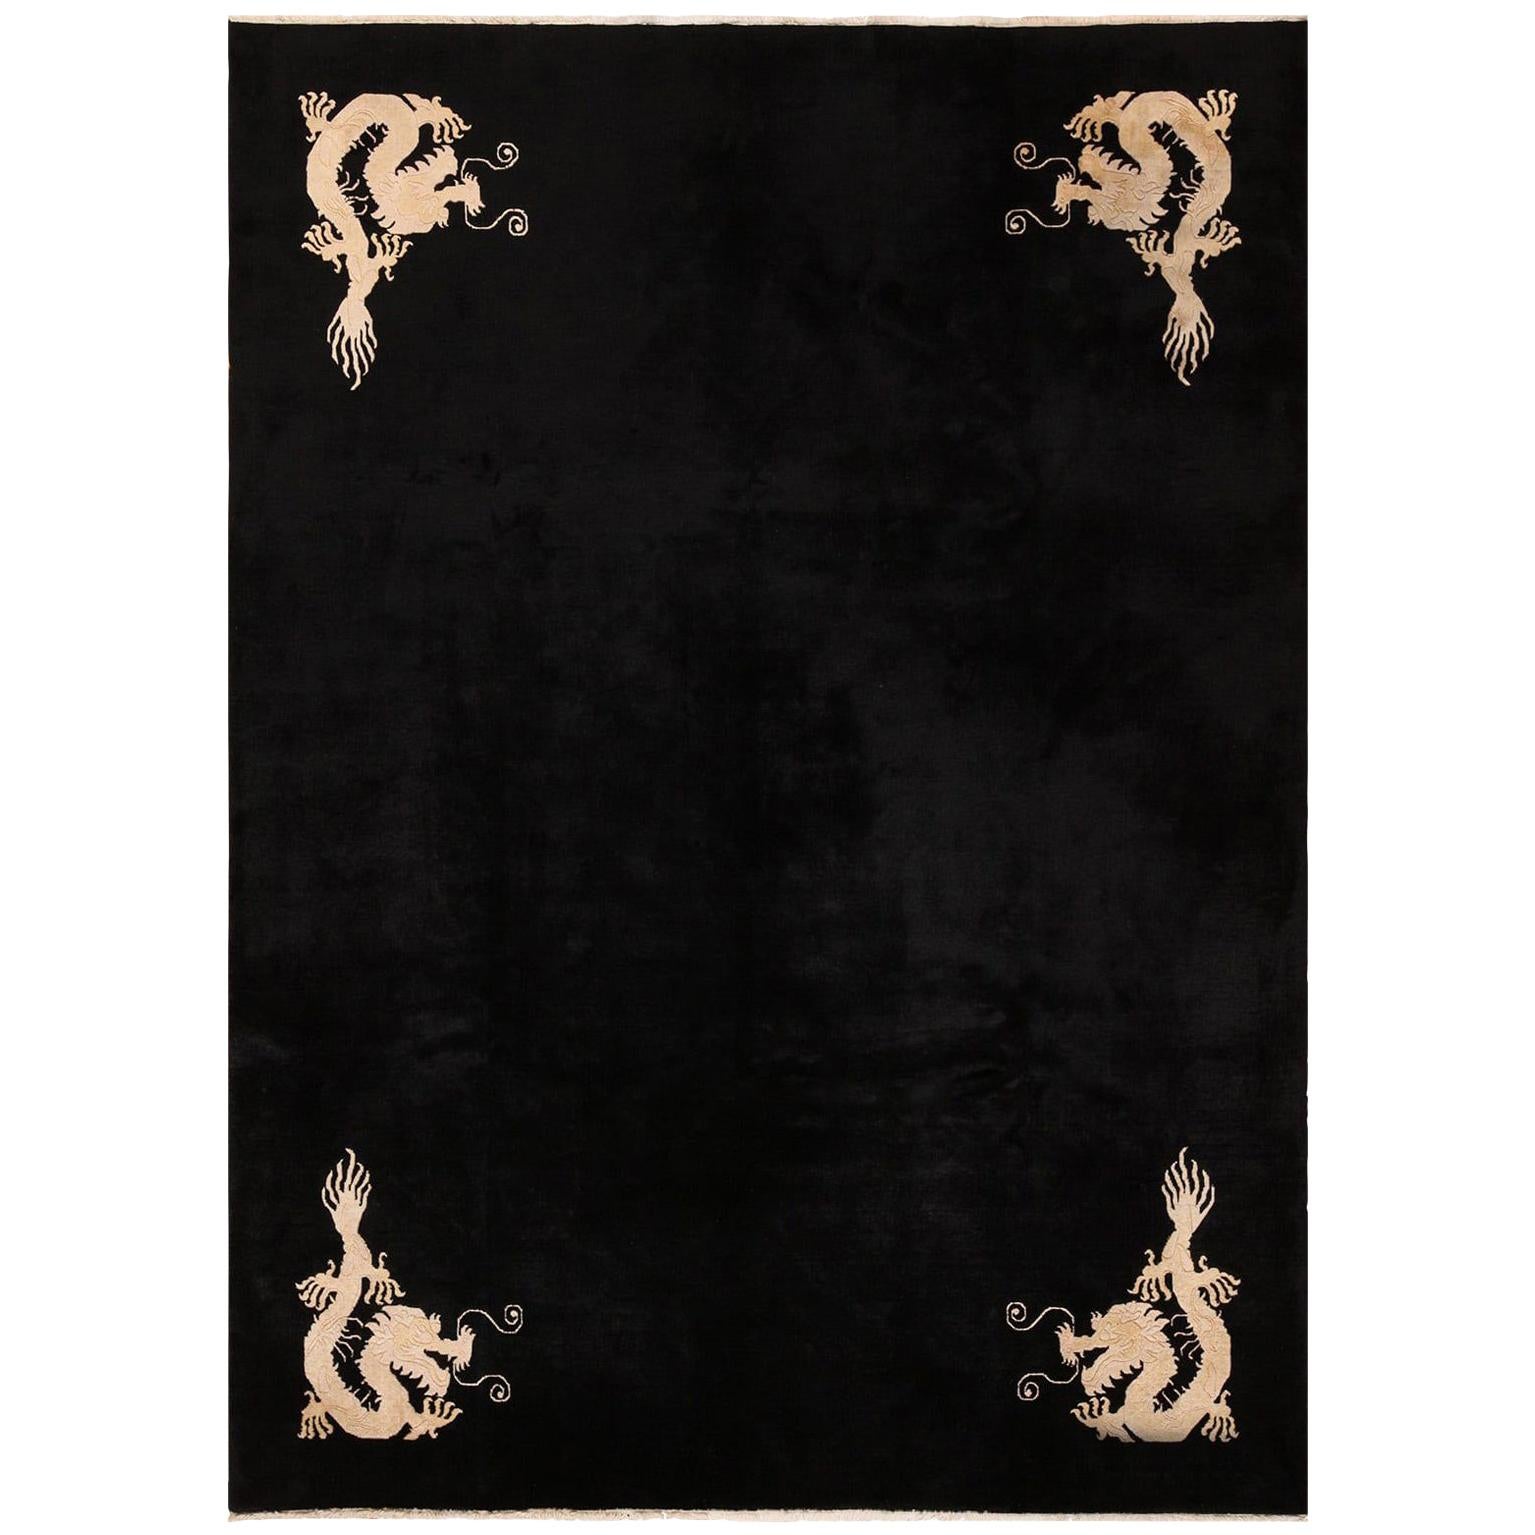 Magnificent room size benevolent five clawed dragon design black antique Chinese rug, country of origin / rug type: China rug, date circa 1920. Size: 7 ft x 9 ft 6 in (2.13 m x 2.9 m).

The benevolent Chinese dragon design is a protective symbol